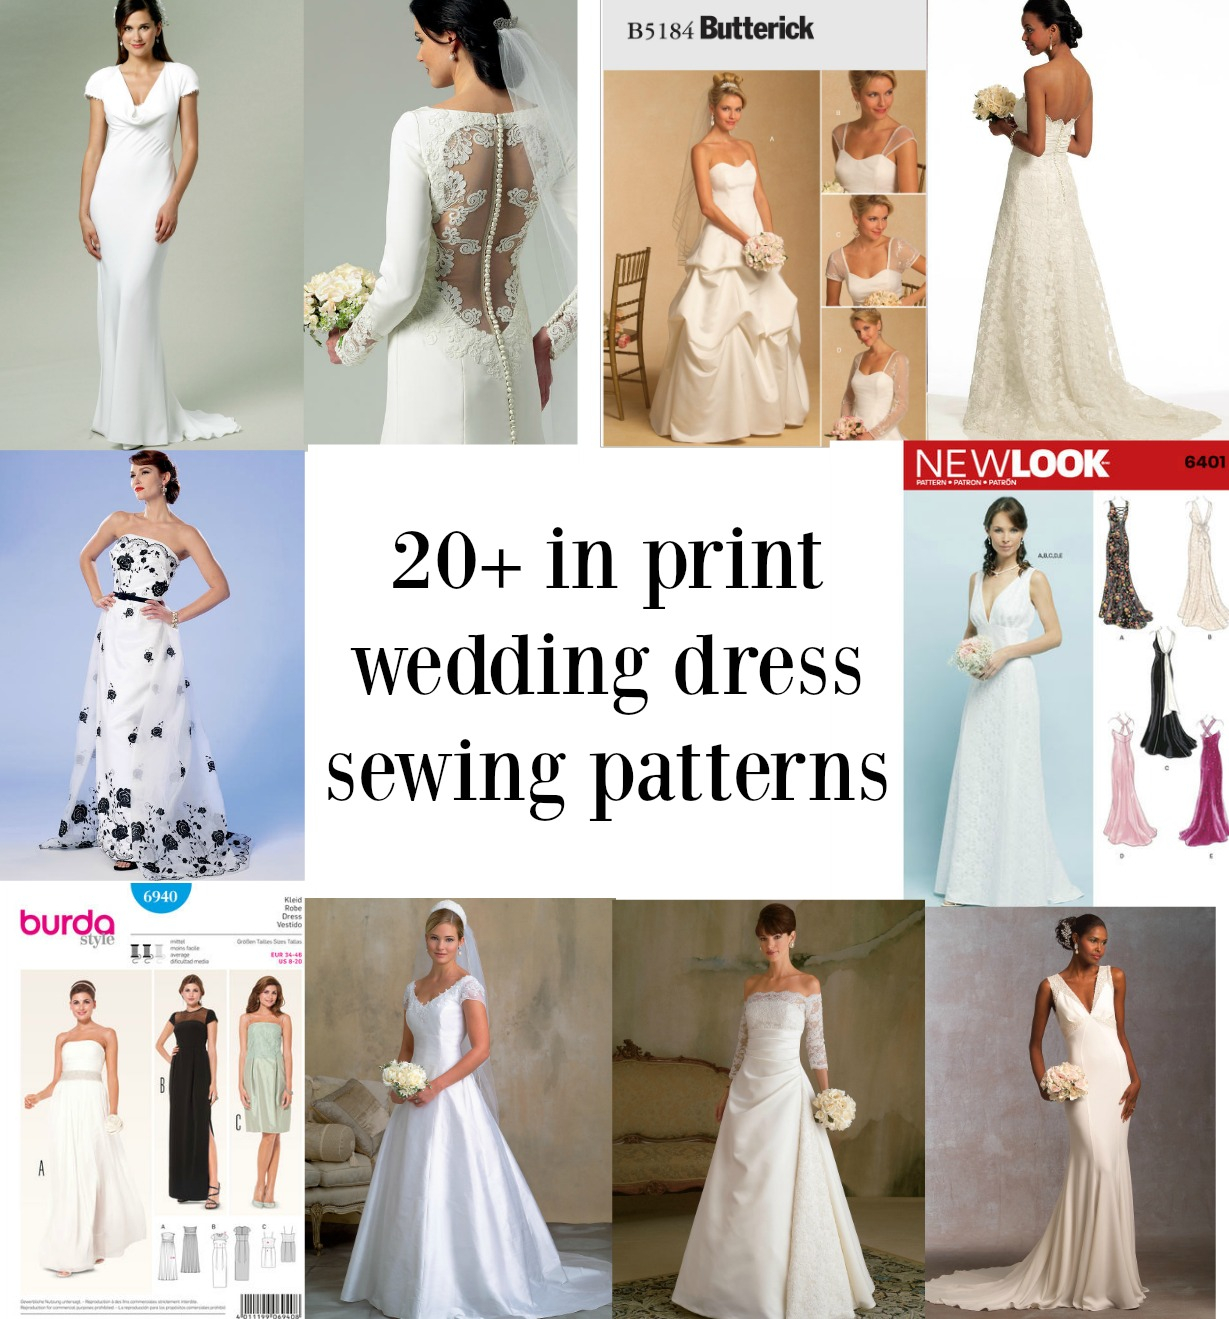 Wedding Dress Sewing Patterns Links To Over Twenty In Print Bridal Gown Sewing Patterns